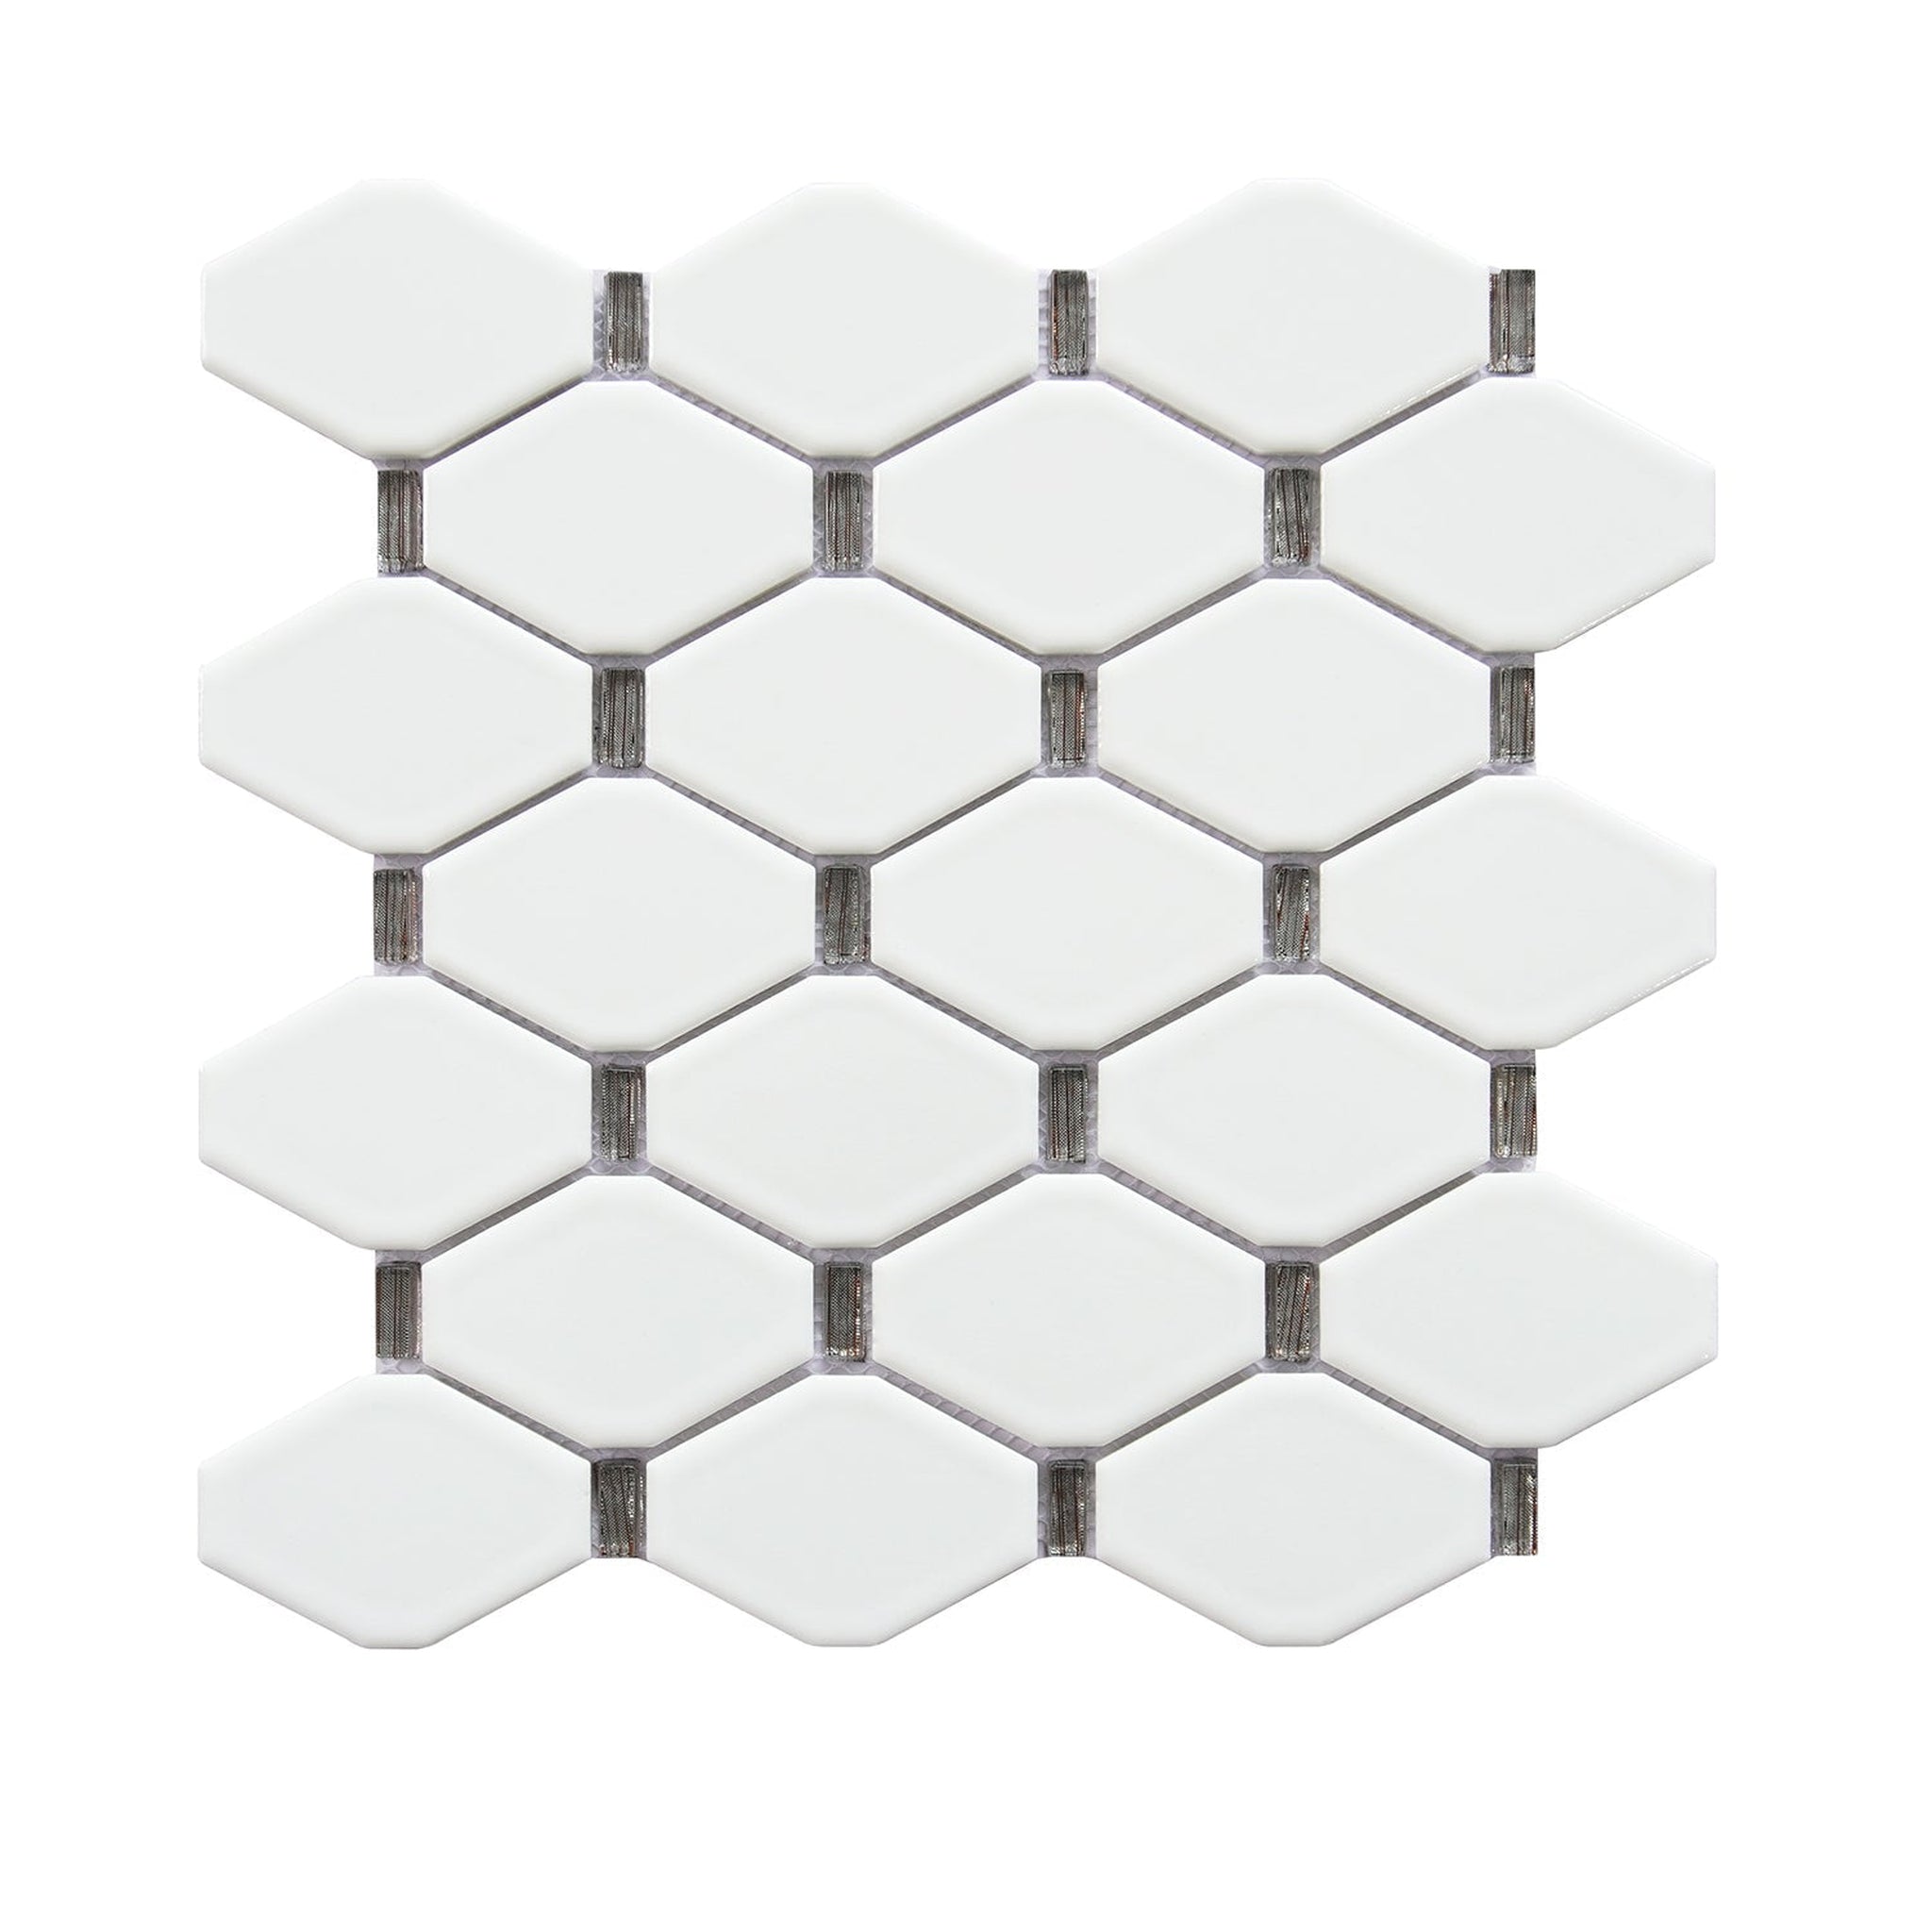 Altair, Altair Badajoz 11 pcs. Honeycomb White and Brown Glass Mosaic Wall Tile